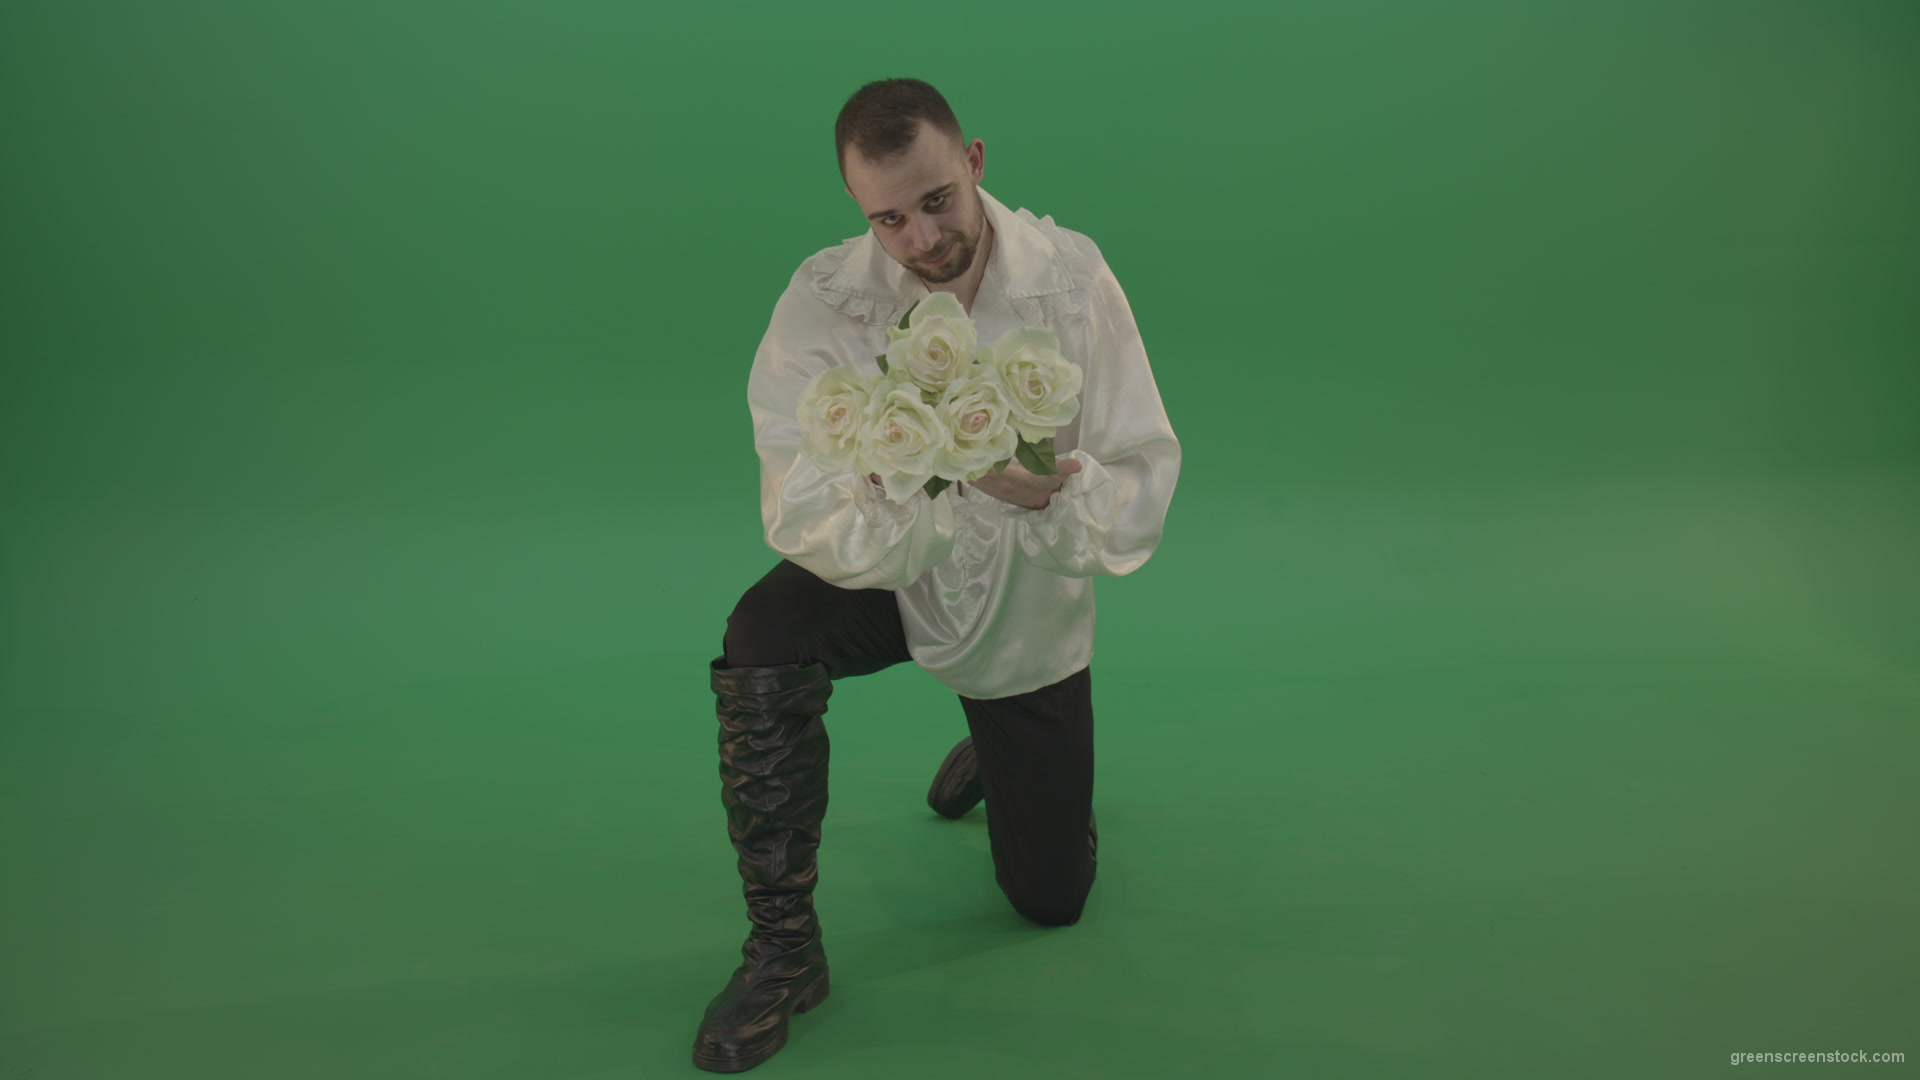 Medieval-man-gives-white-flowers-standing-on-one-knee-isolated-in-green-screen-studio_009 Green Screen Stock